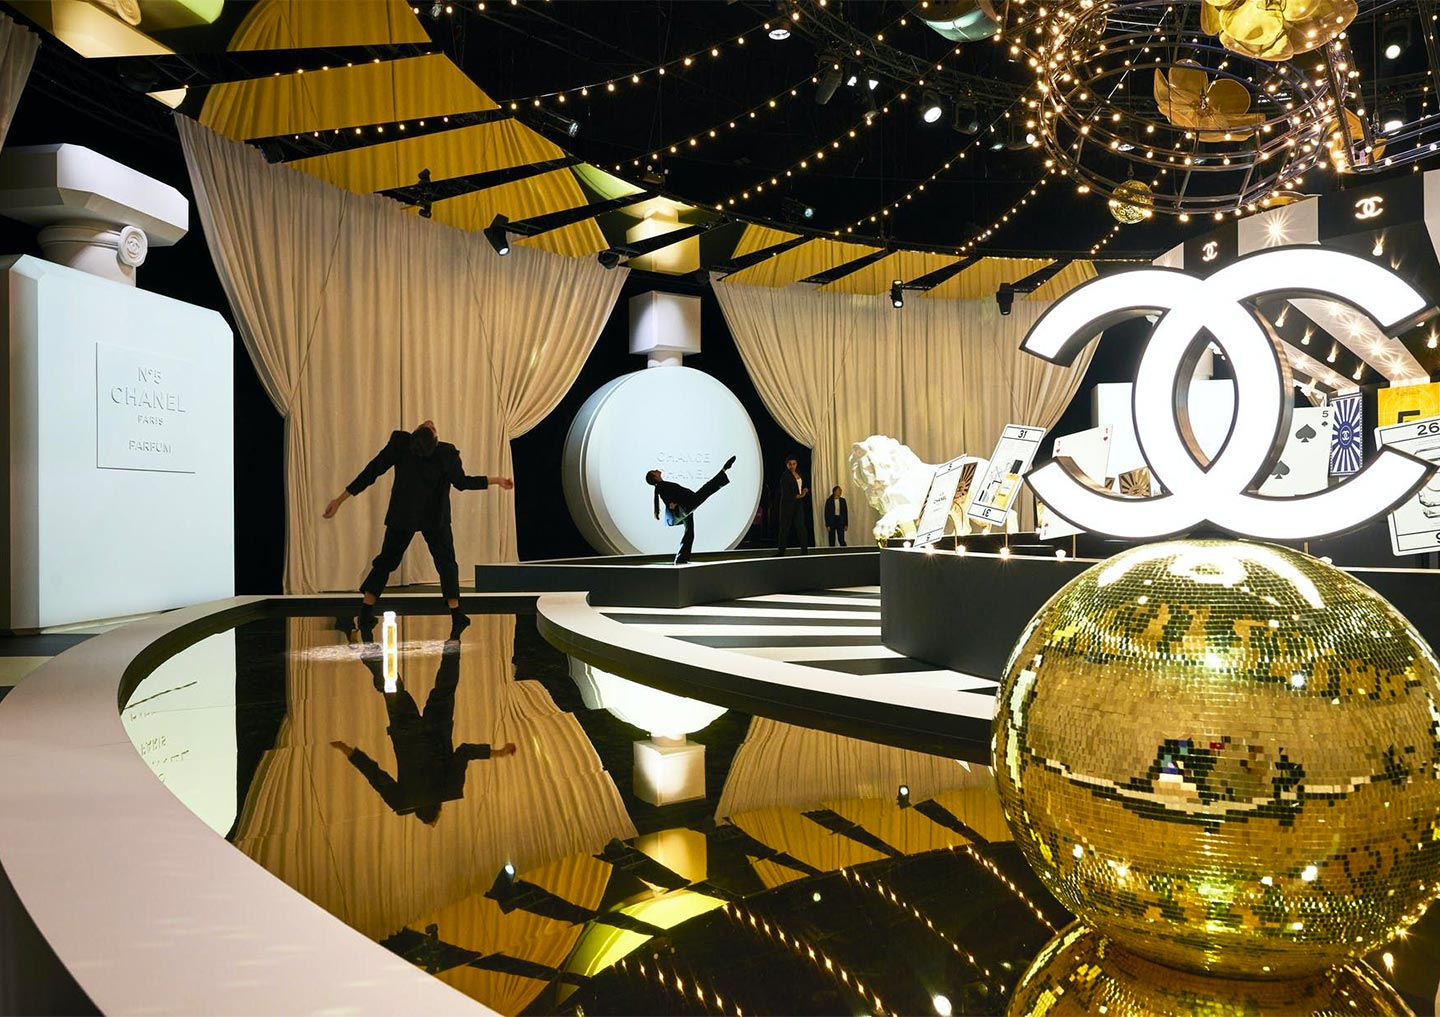 Le Grand numéro de Chanel was Chanel's latest exhibition celebrating the house's iconic perfumes from 15 December 2022 to 9 January 2023 at the Temporary Grand Palais in Paris